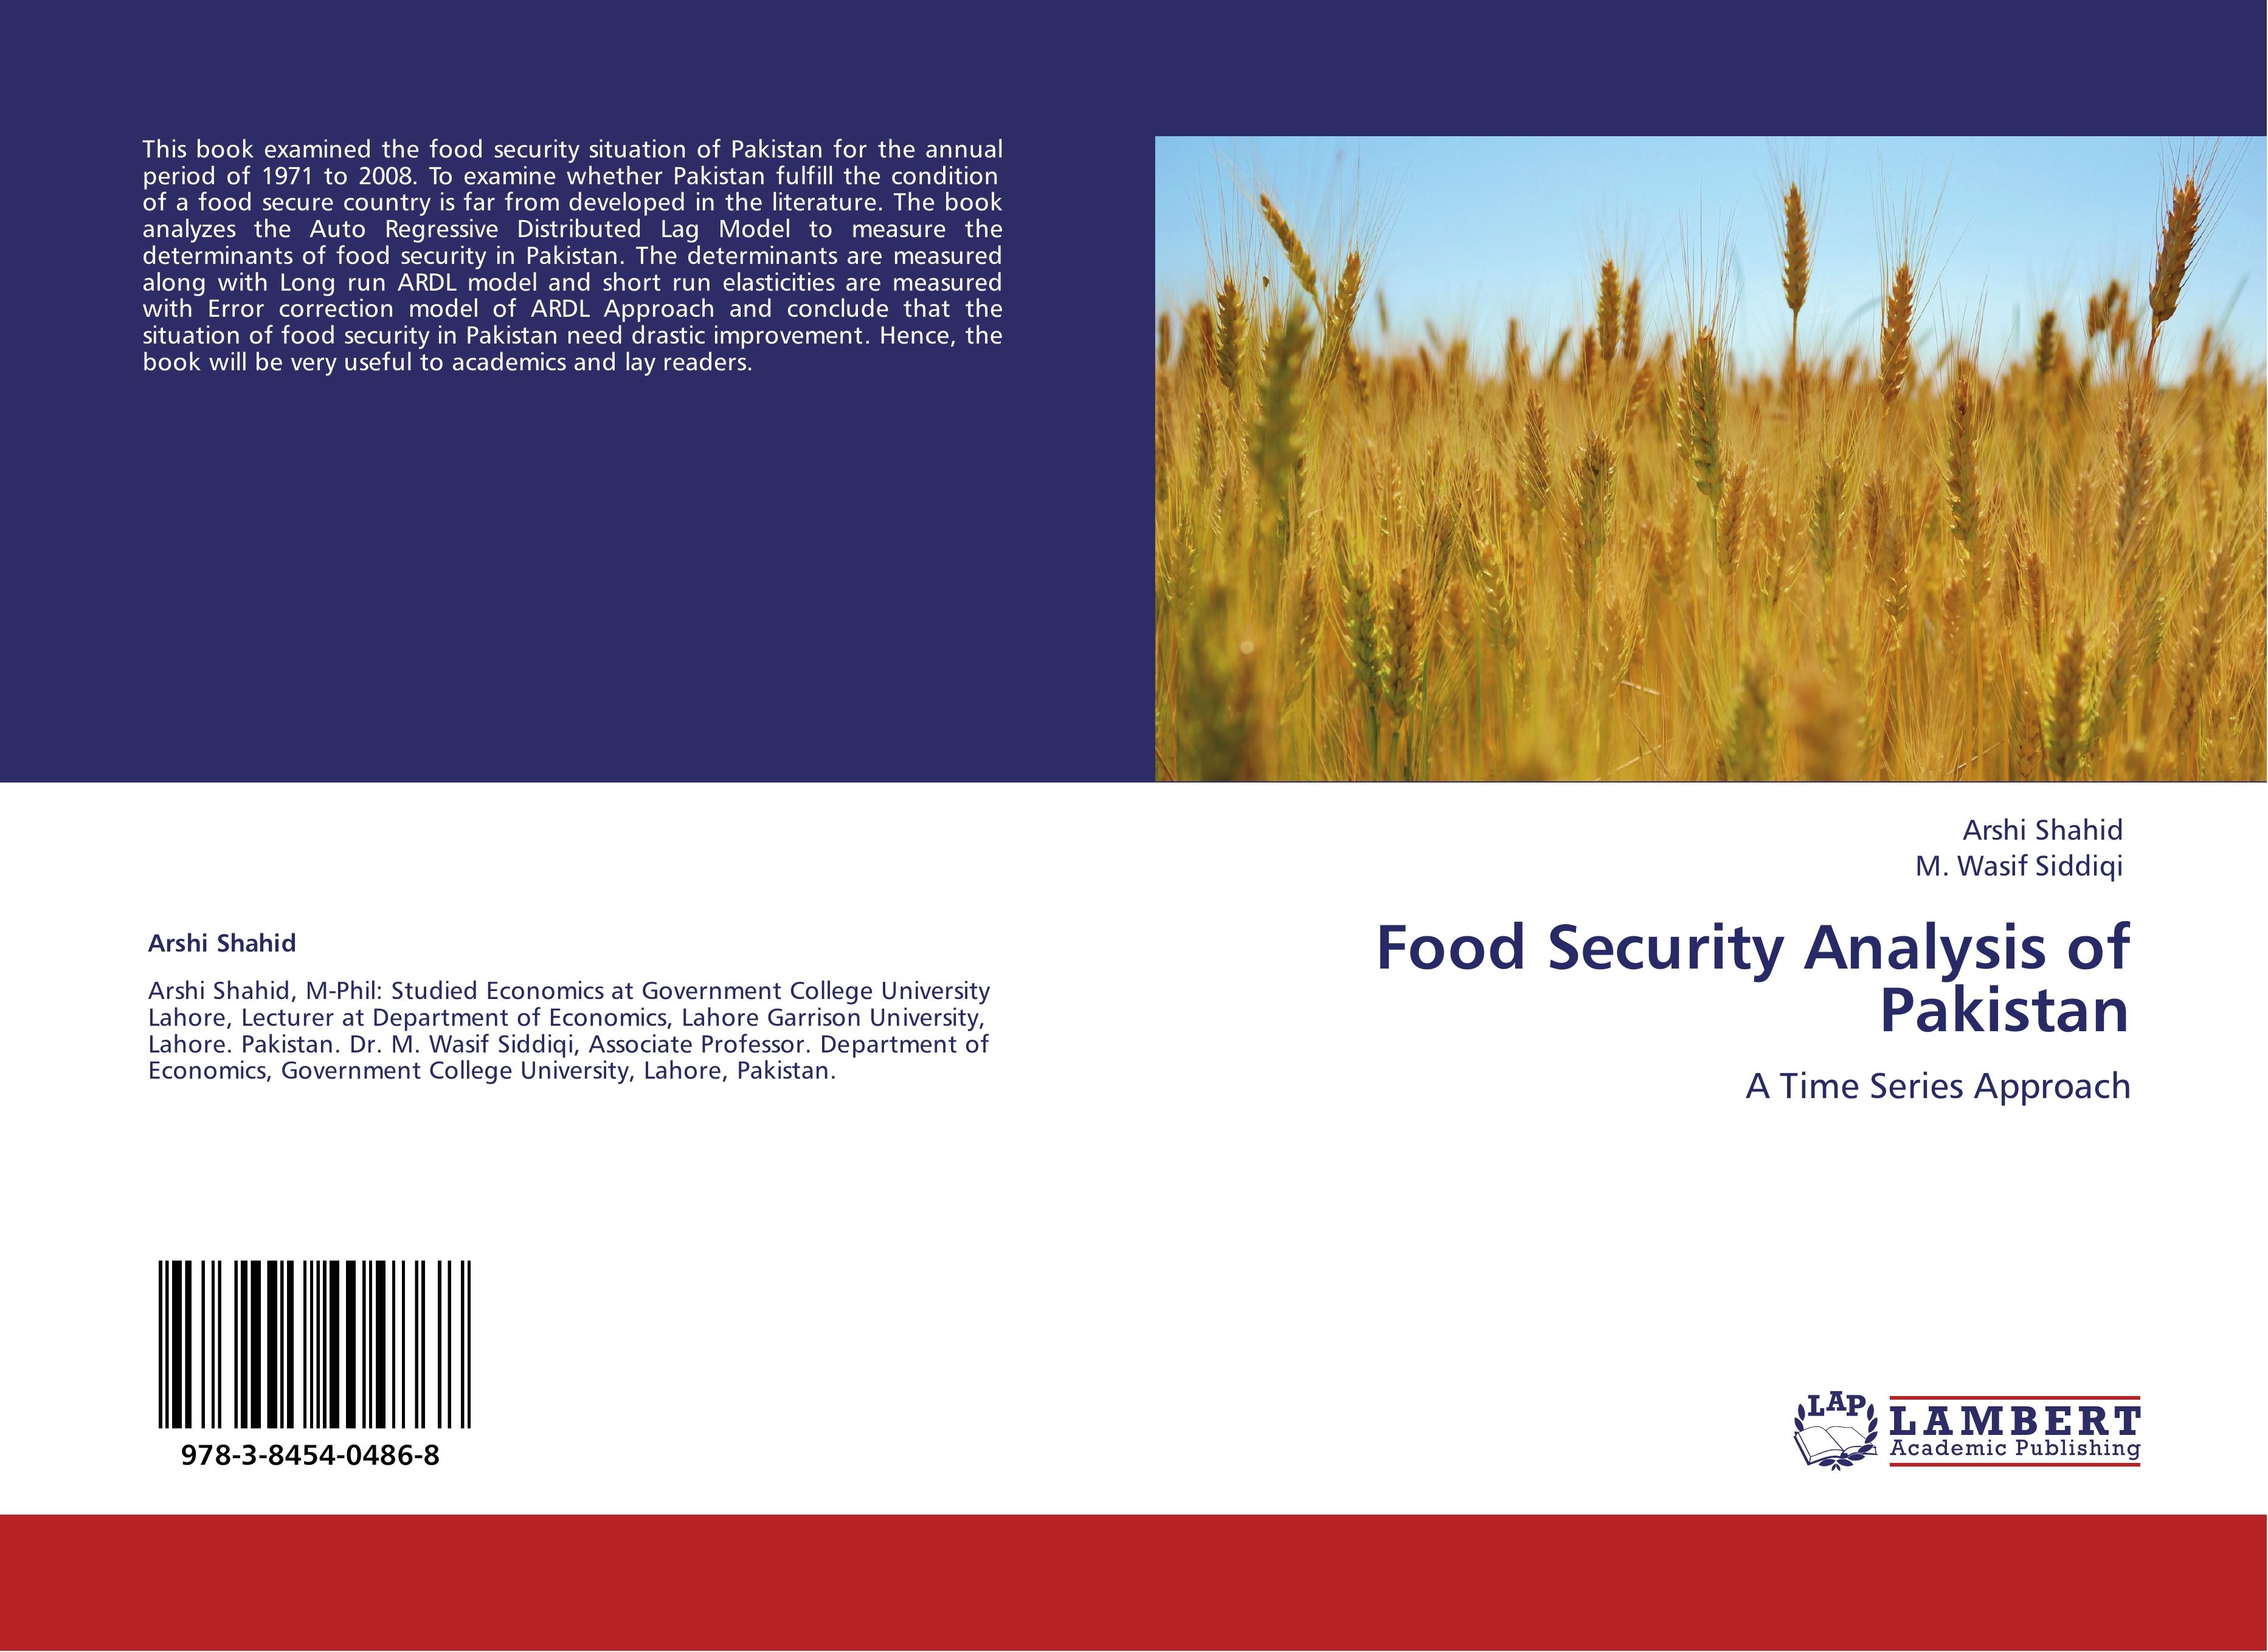 Food Security Analysis of Pakistan | A Time Series Approach | Arshi Shahid (u. a.) | Taschenbuch | Paperback | 96 S. | Englisch | 2011 | LAP LAMBERT Academic Publishing | EAN 9783845404868 - Shahid, Arshi